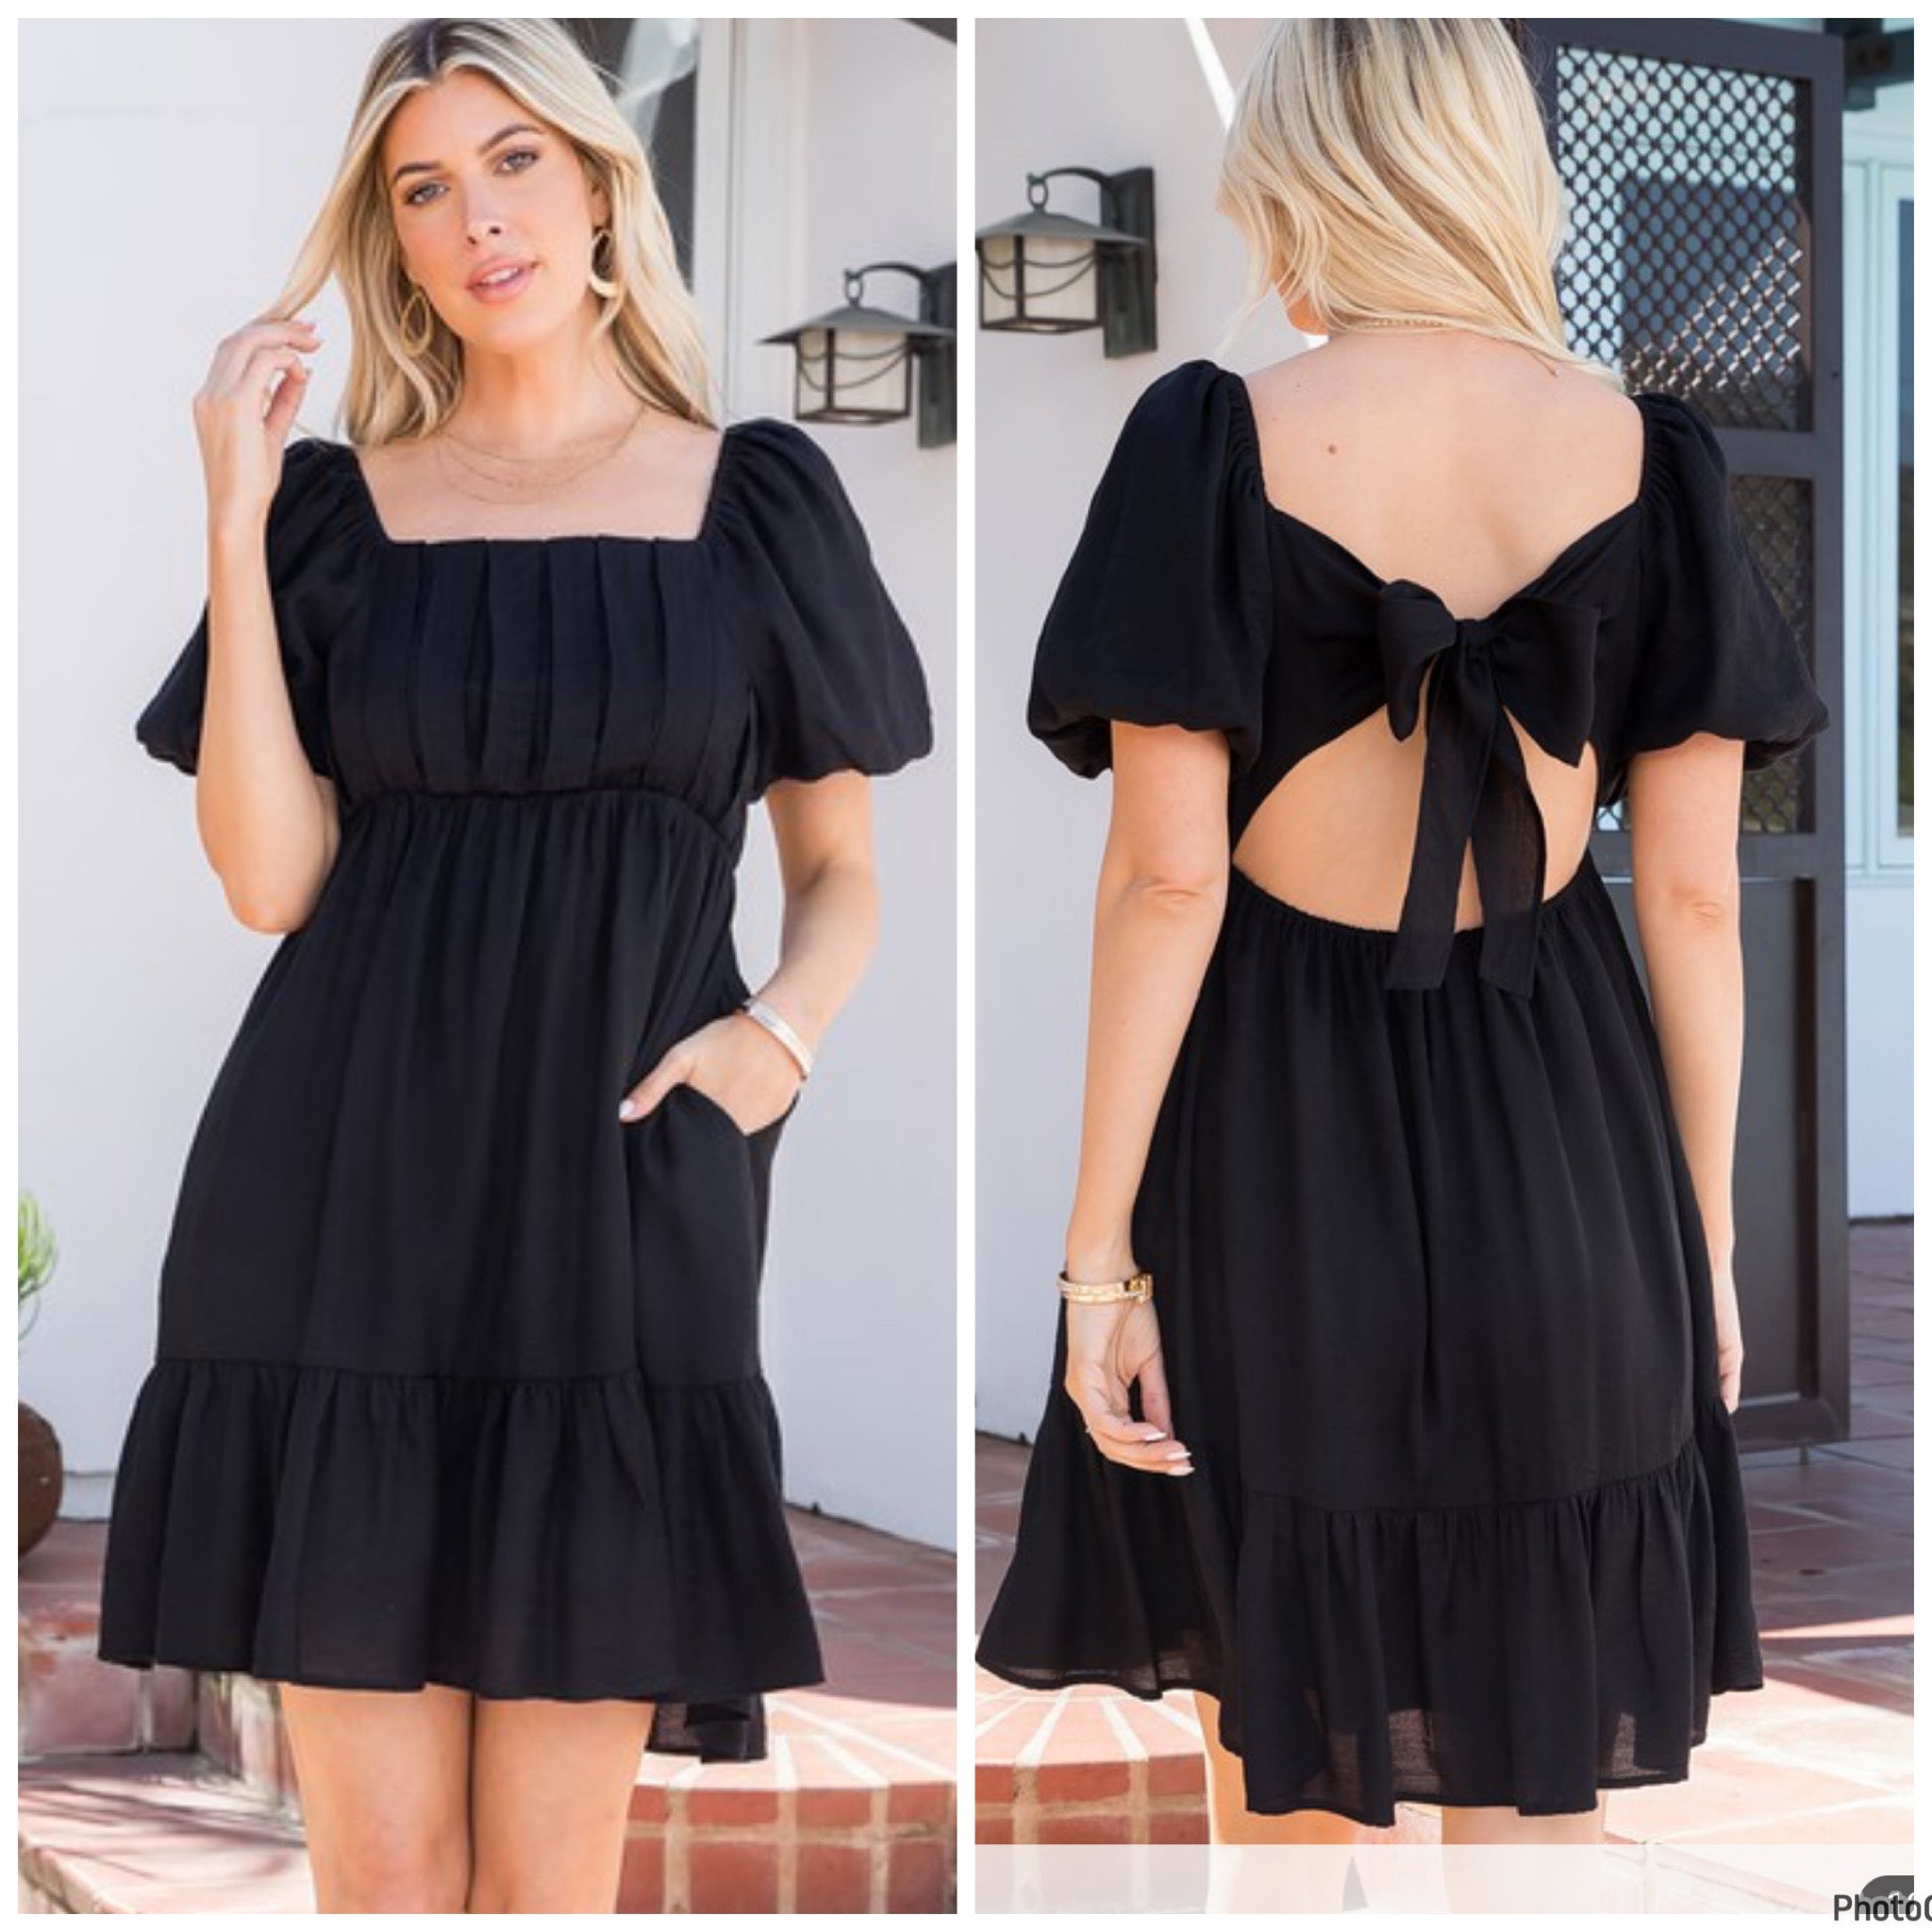 Black mini babydoll dress with tie back details and pockets